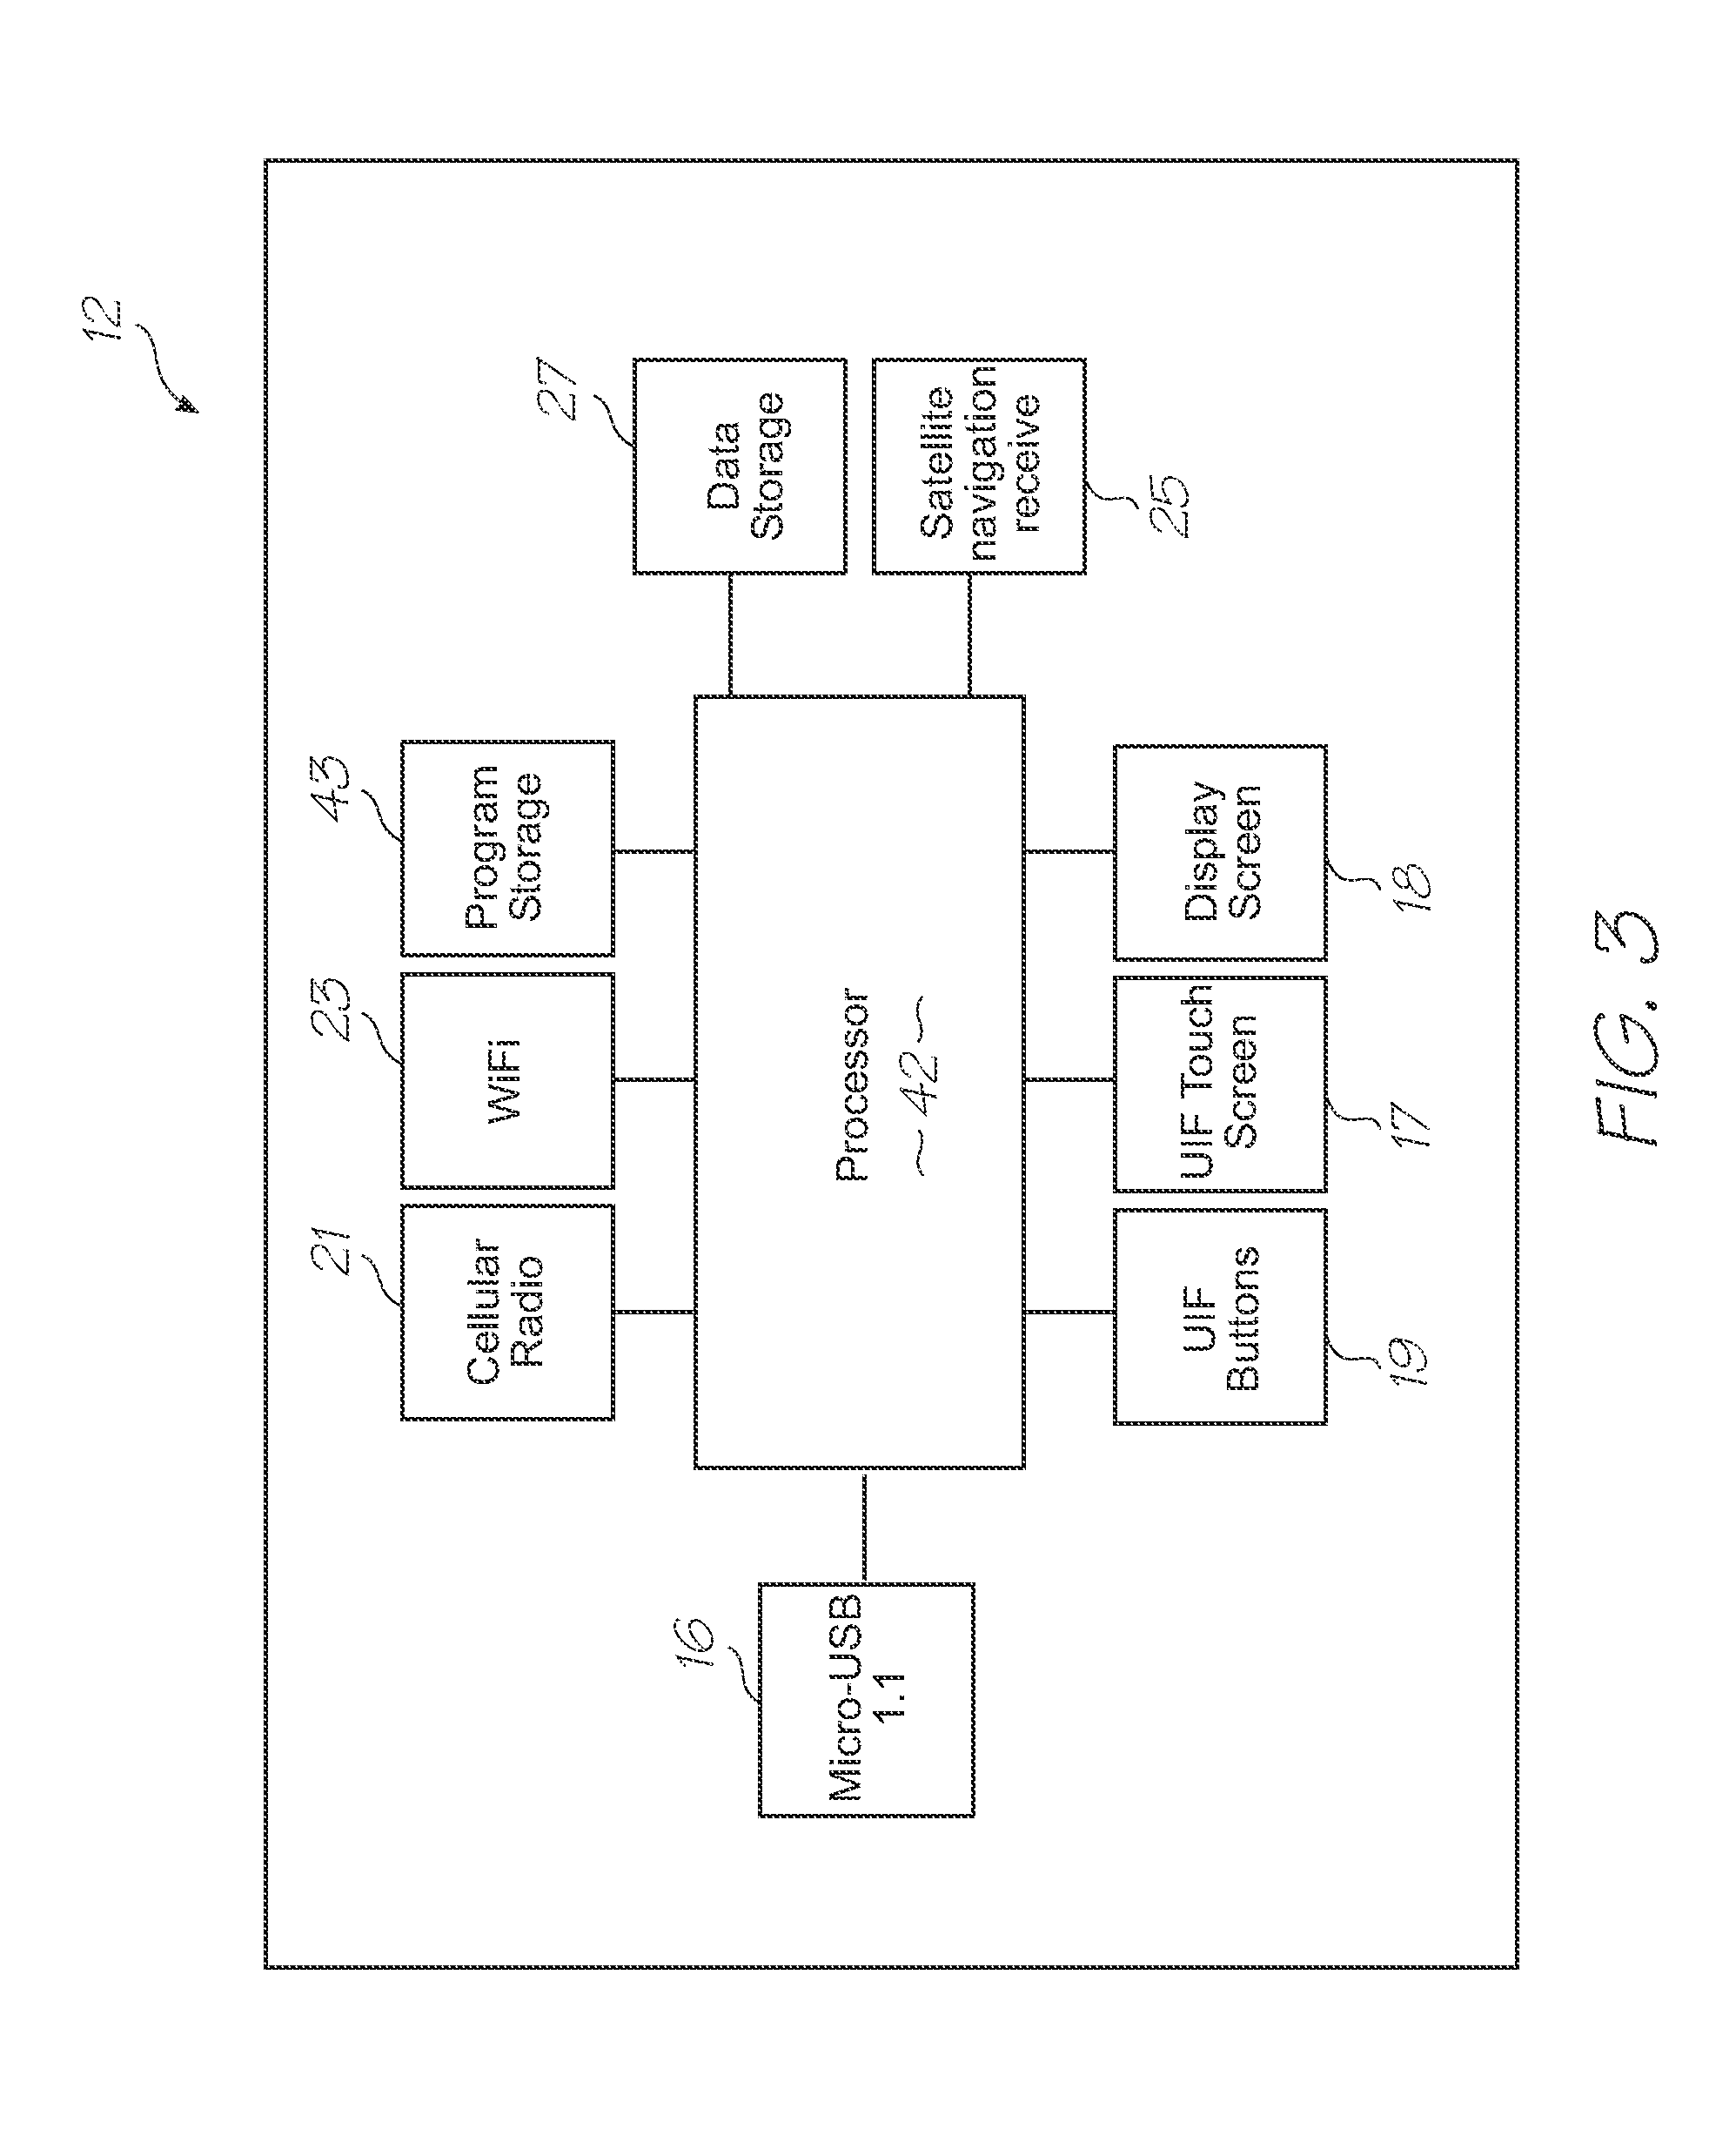 Microfluidic device with surface tension valve at reagent reservoir outlet